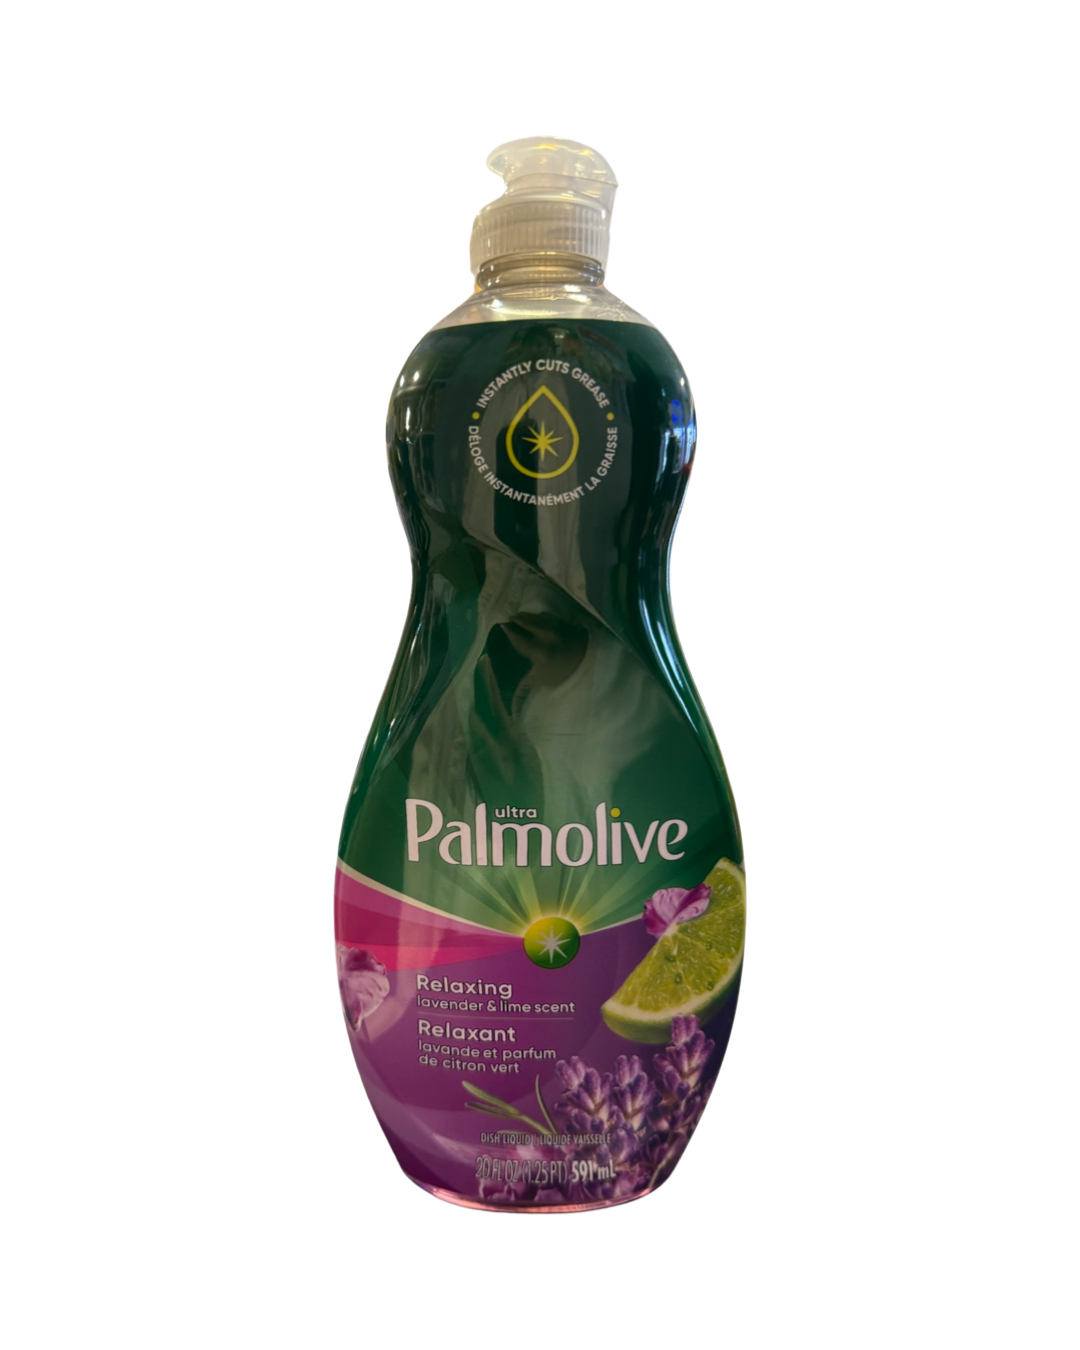 PALMOLIVE - RELAXING LAVENDER & LIME